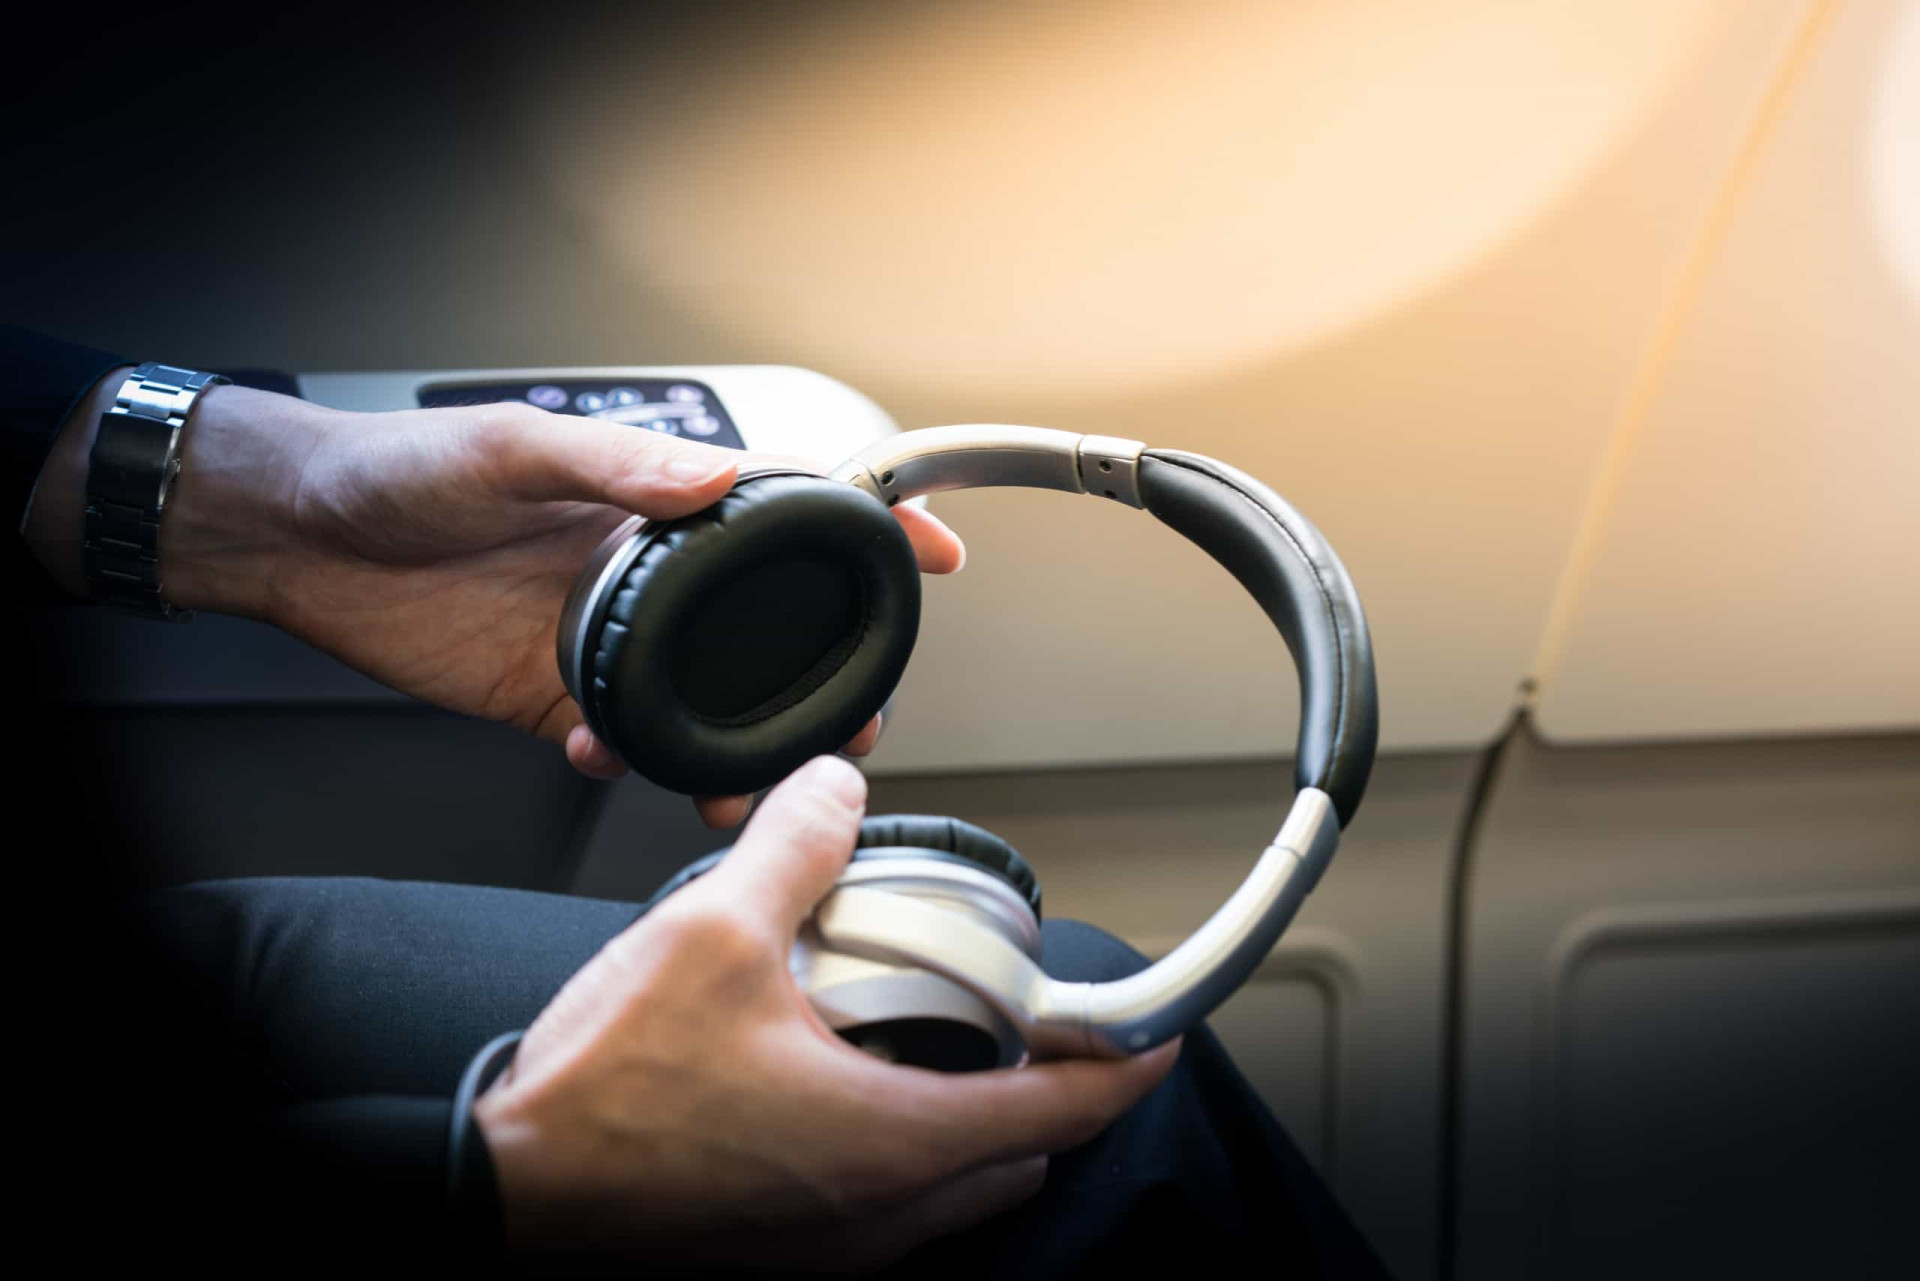 <p>If you can't afford noise-canceling headphones, go for high-quality earplugs instead. It's a great way to block out the airplane noise and loud passengers.</p><p>You may also like:<a href="https://www.starsinsider.com/n/251231?utm_source=msn.com&utm_medium=display&utm_campaign=referral_description&utm_content=500296v1en-us"> Can you guess the celebs in these pictures? </a></p>